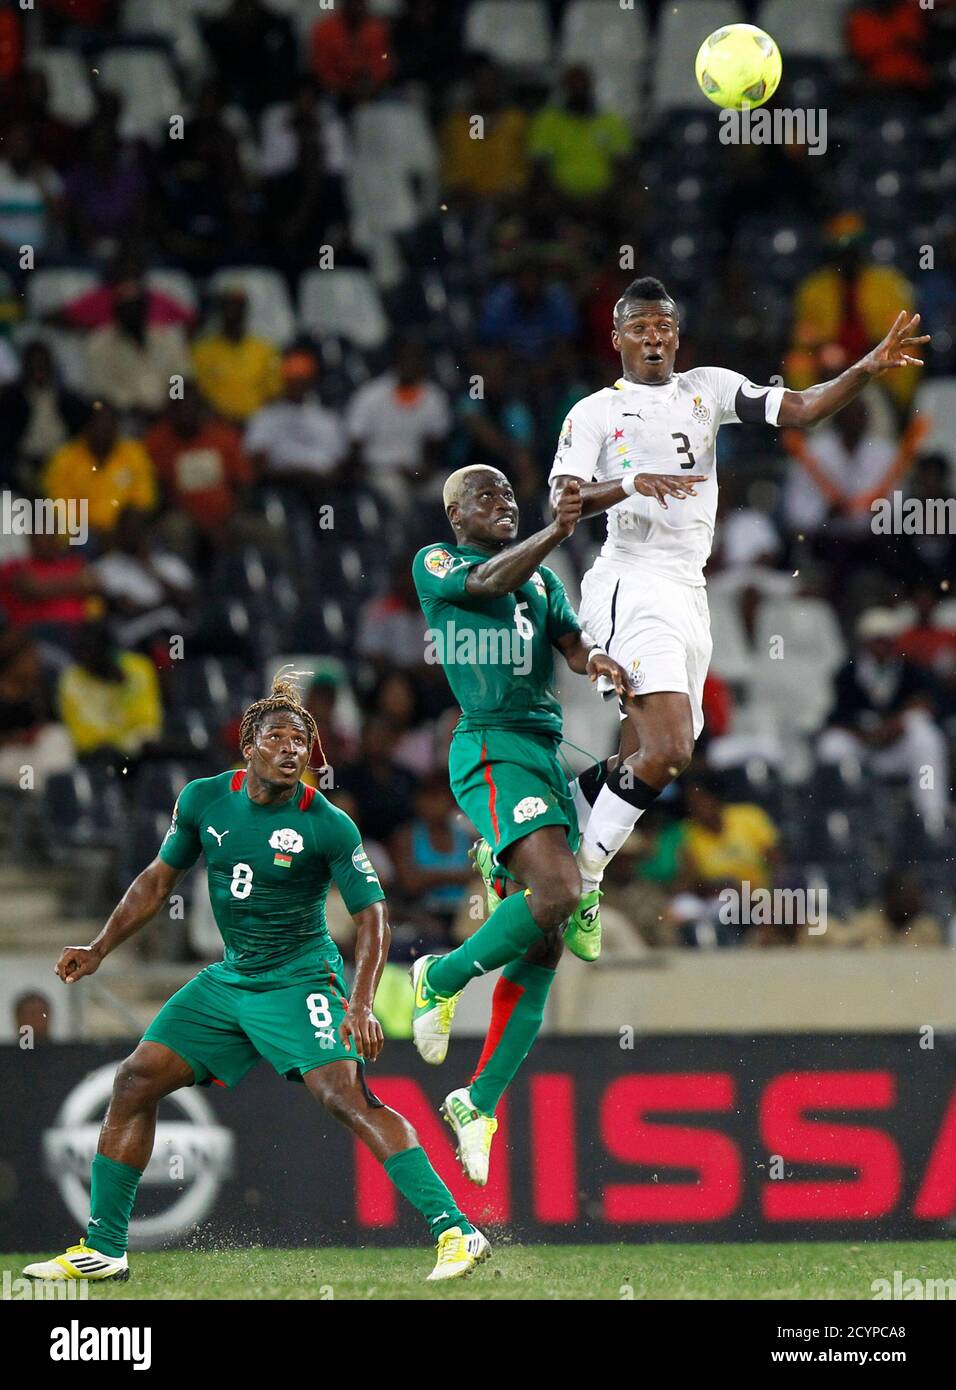 Ghana's Asamoah Gyan (R) is challenged by Burkina Faso's Anthony Annan (C) as Paul Koulibaly looks on during their African Cup of Nations (AFCON 2013) semi-final soccer match at the Mbombela Stadium in Nelspruit February 6, 2013. REUTERS/Thomas Mukoya (SOUTH AFRICA - Tags: SPORT SOCCER TPX IMAGES OF THE DAY) Stock Photo